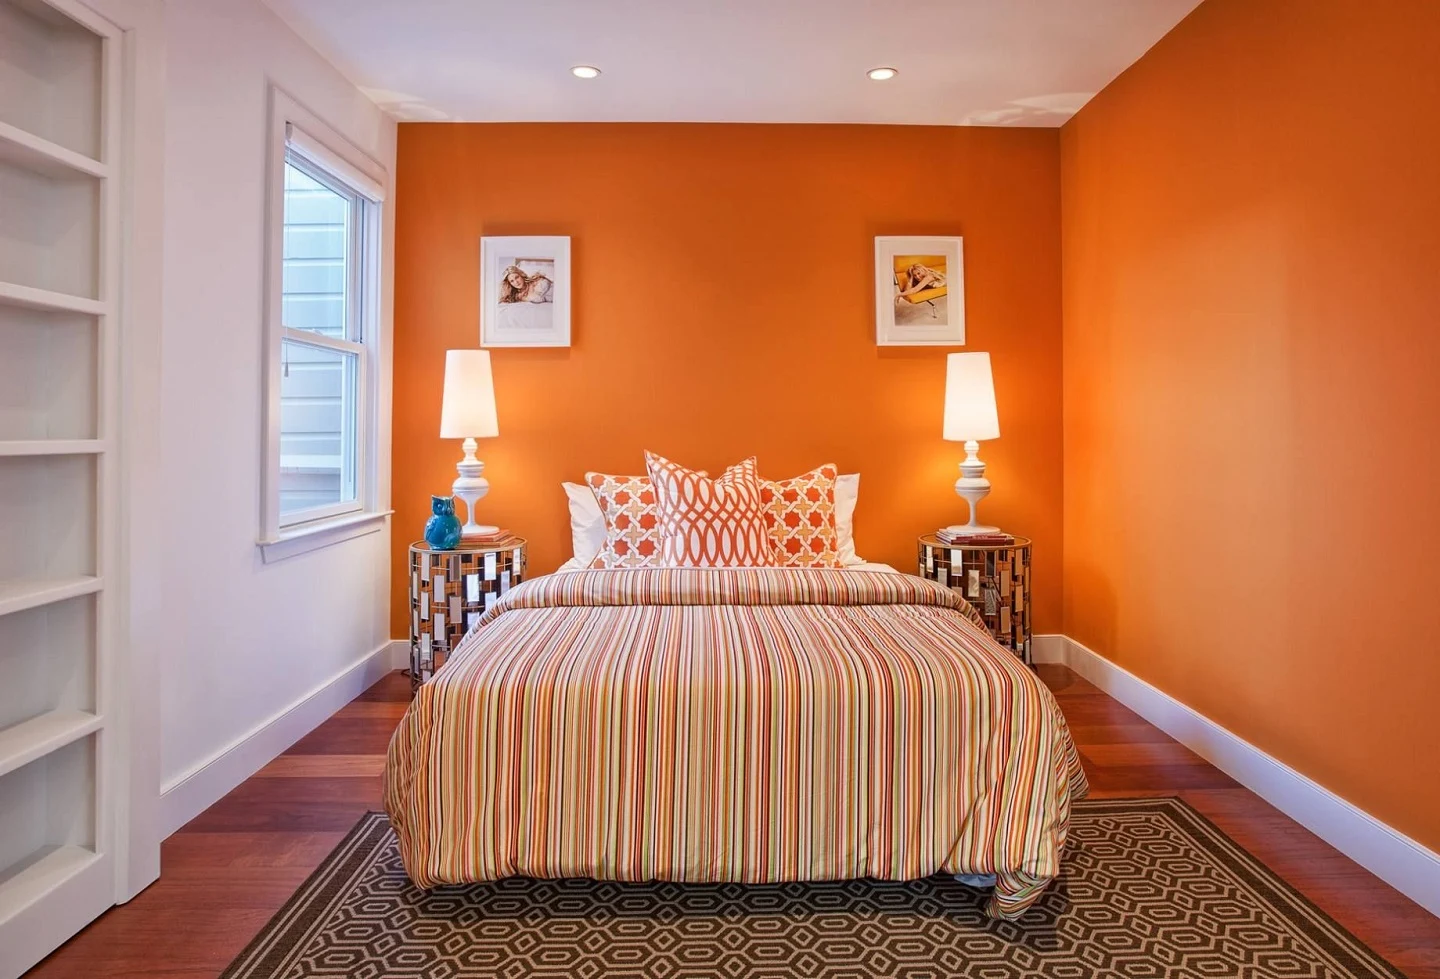 How does paint affect a room size?